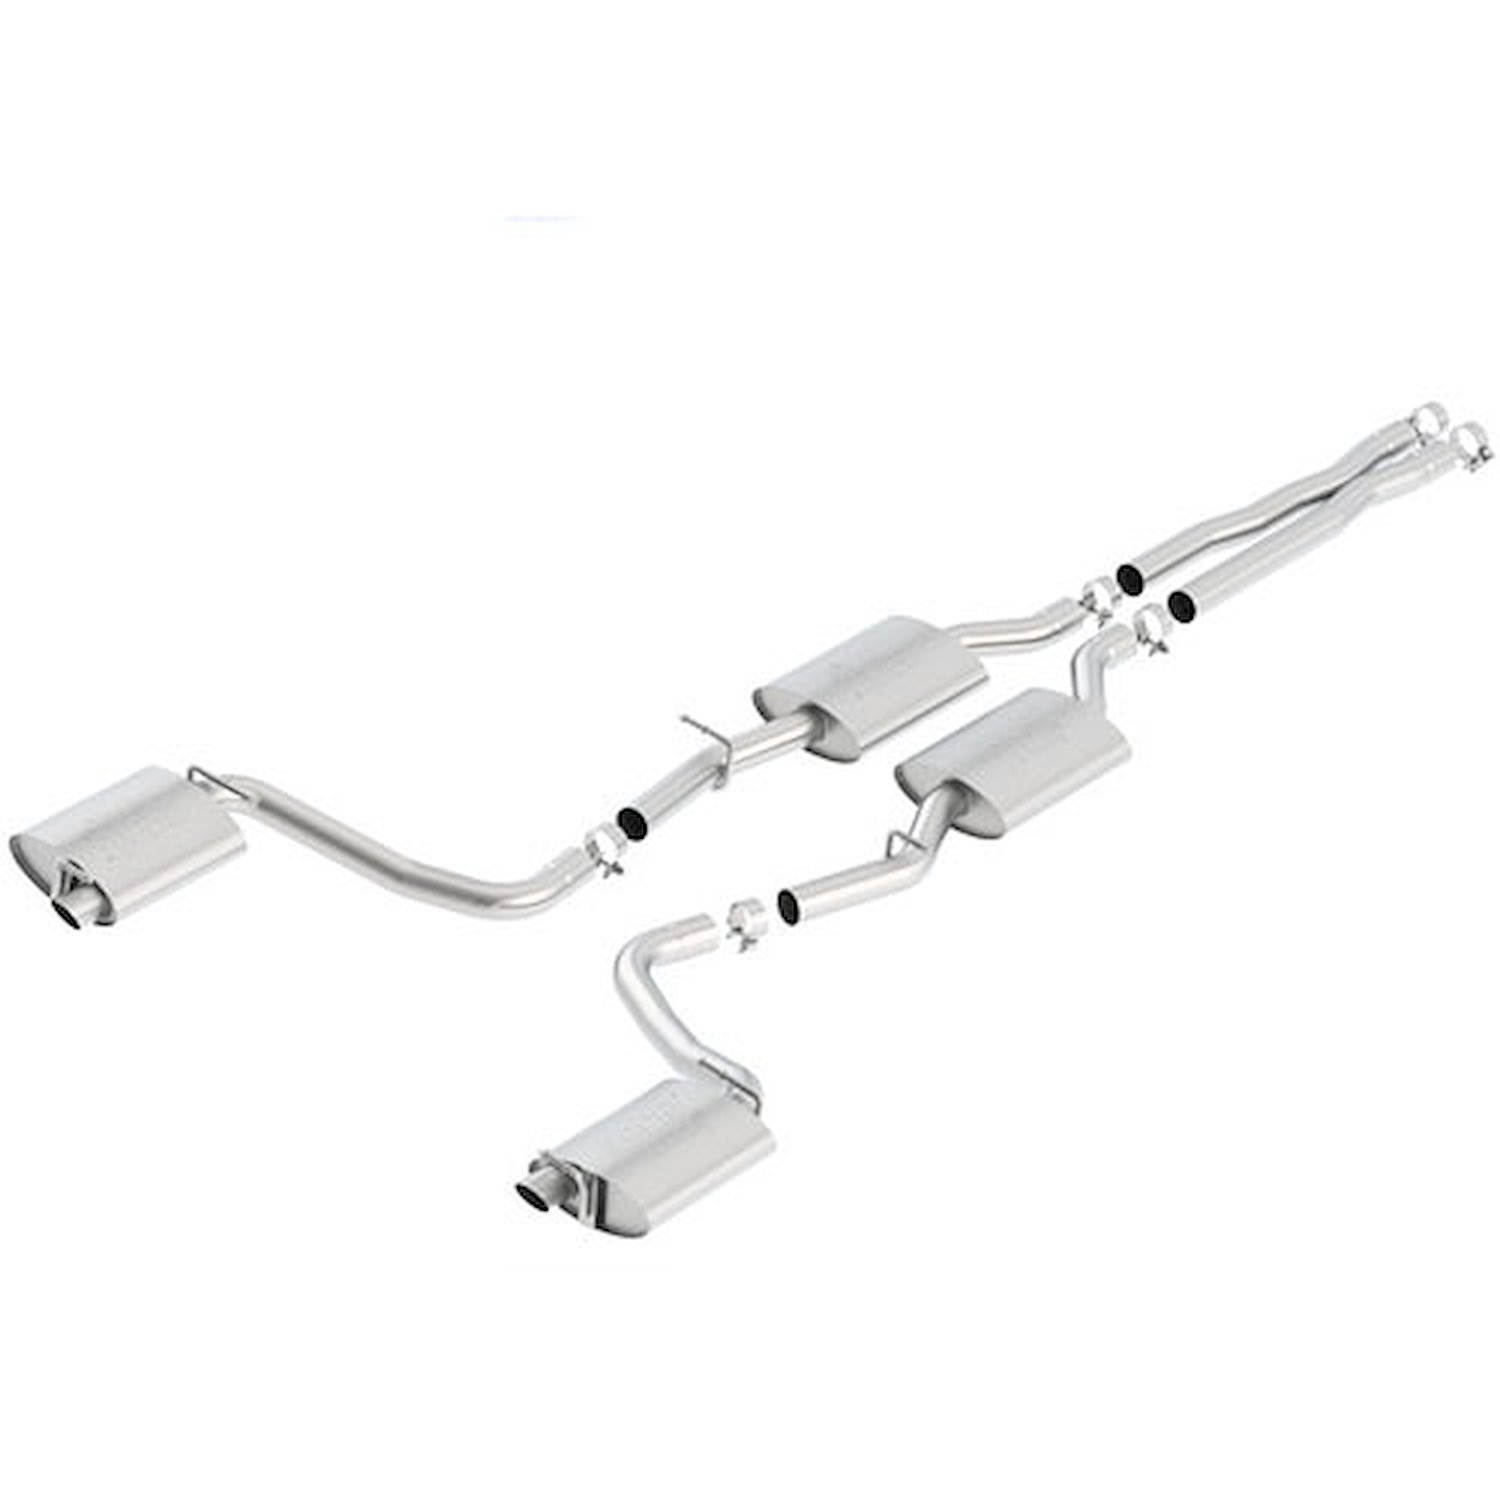 Cat-Back Exhaust System for Charger 2015-18 Charger R/T 5.7L